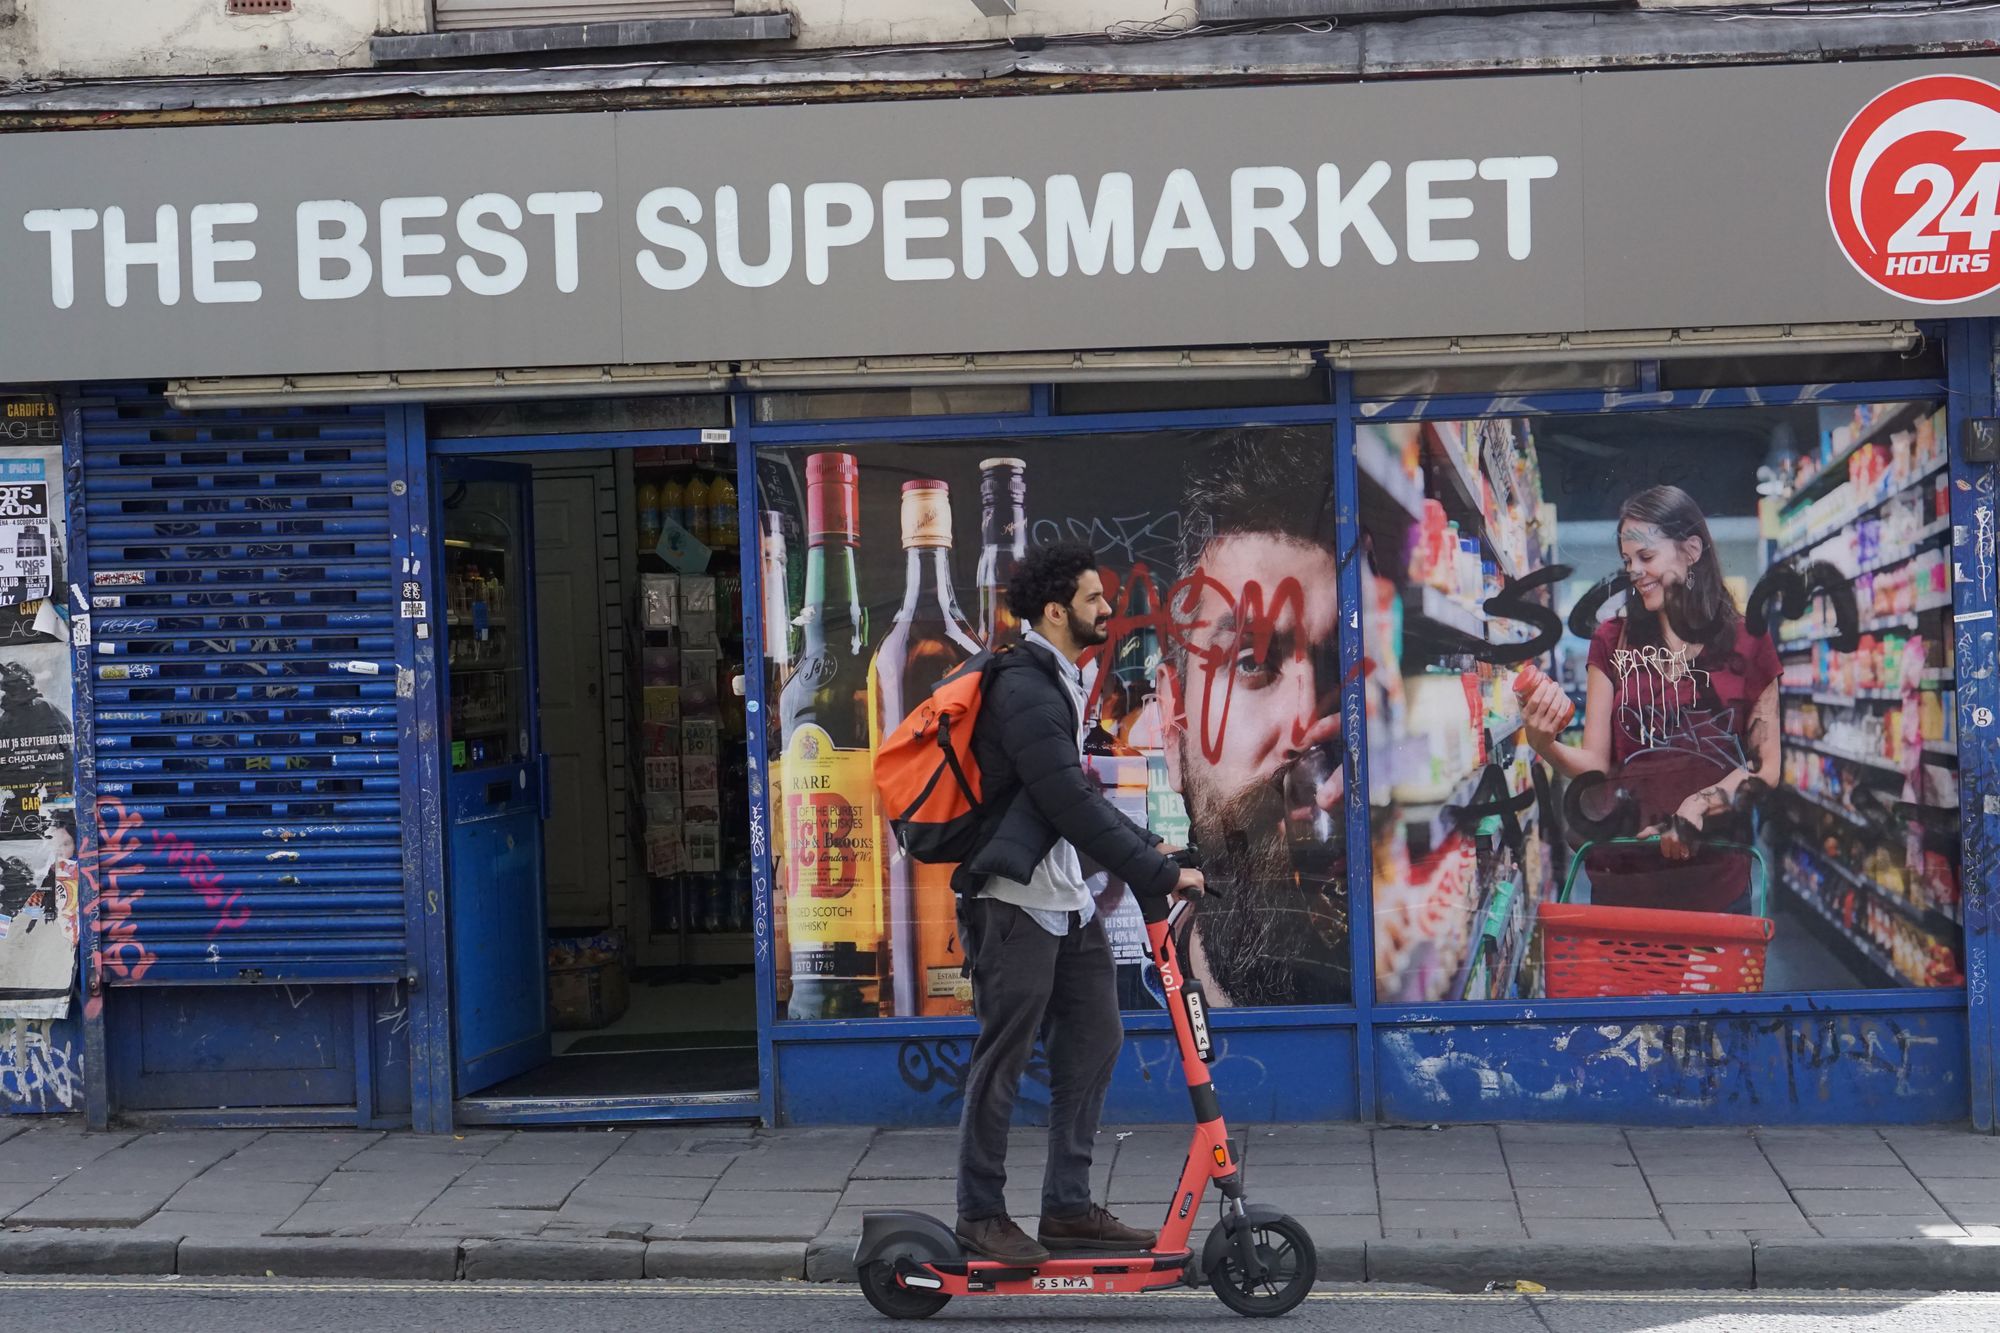 A man with a beard and an orange backpack rides an electric scooter in front of a graffitied shopfront for "The Best Supermarket."